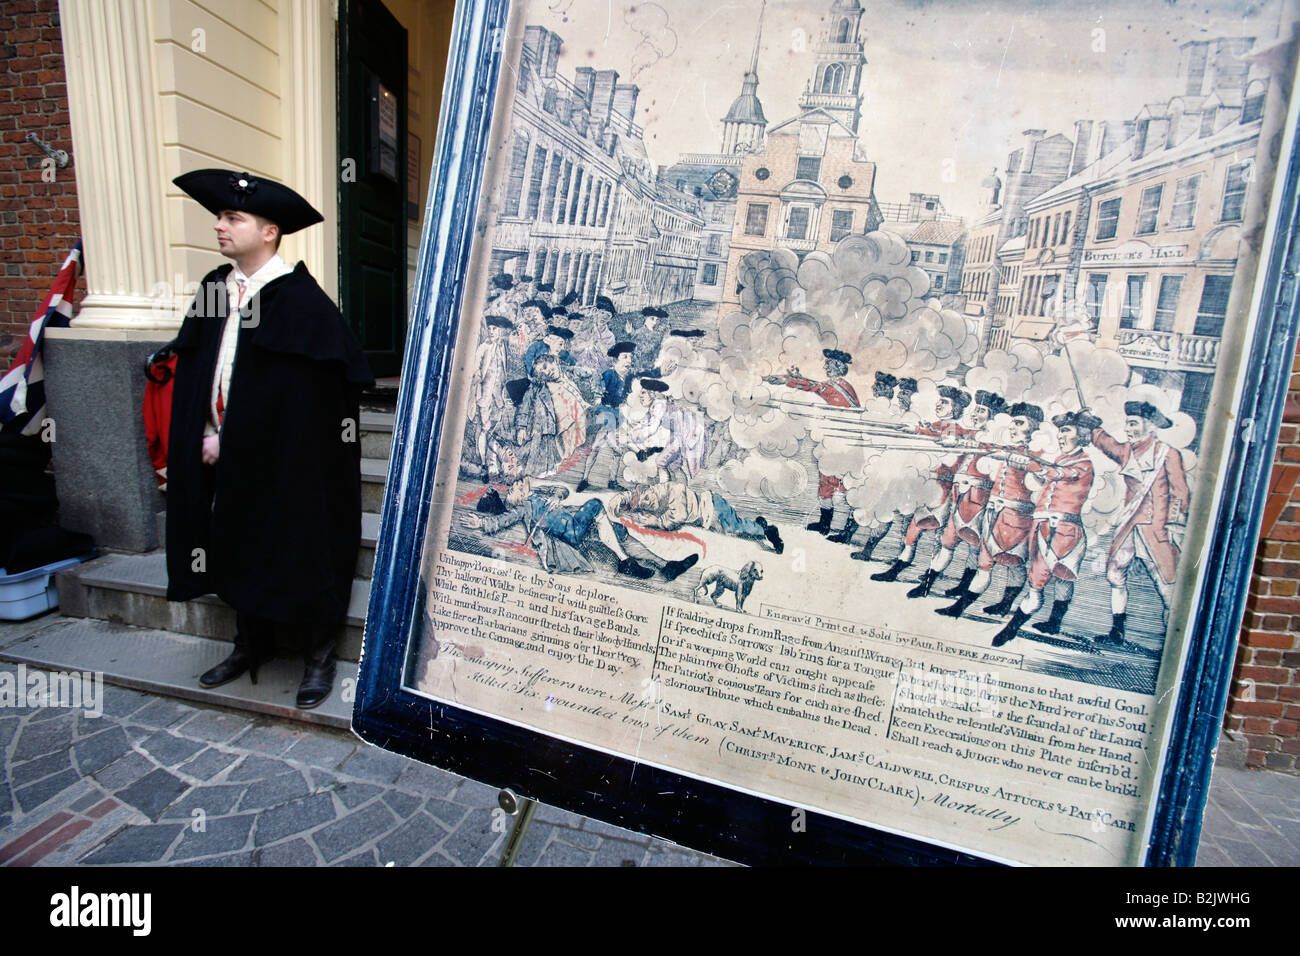 A reenactor in colonial era British army attire stands next to a period depiction of the Boston Massacre on the site it occurred Stock Photo